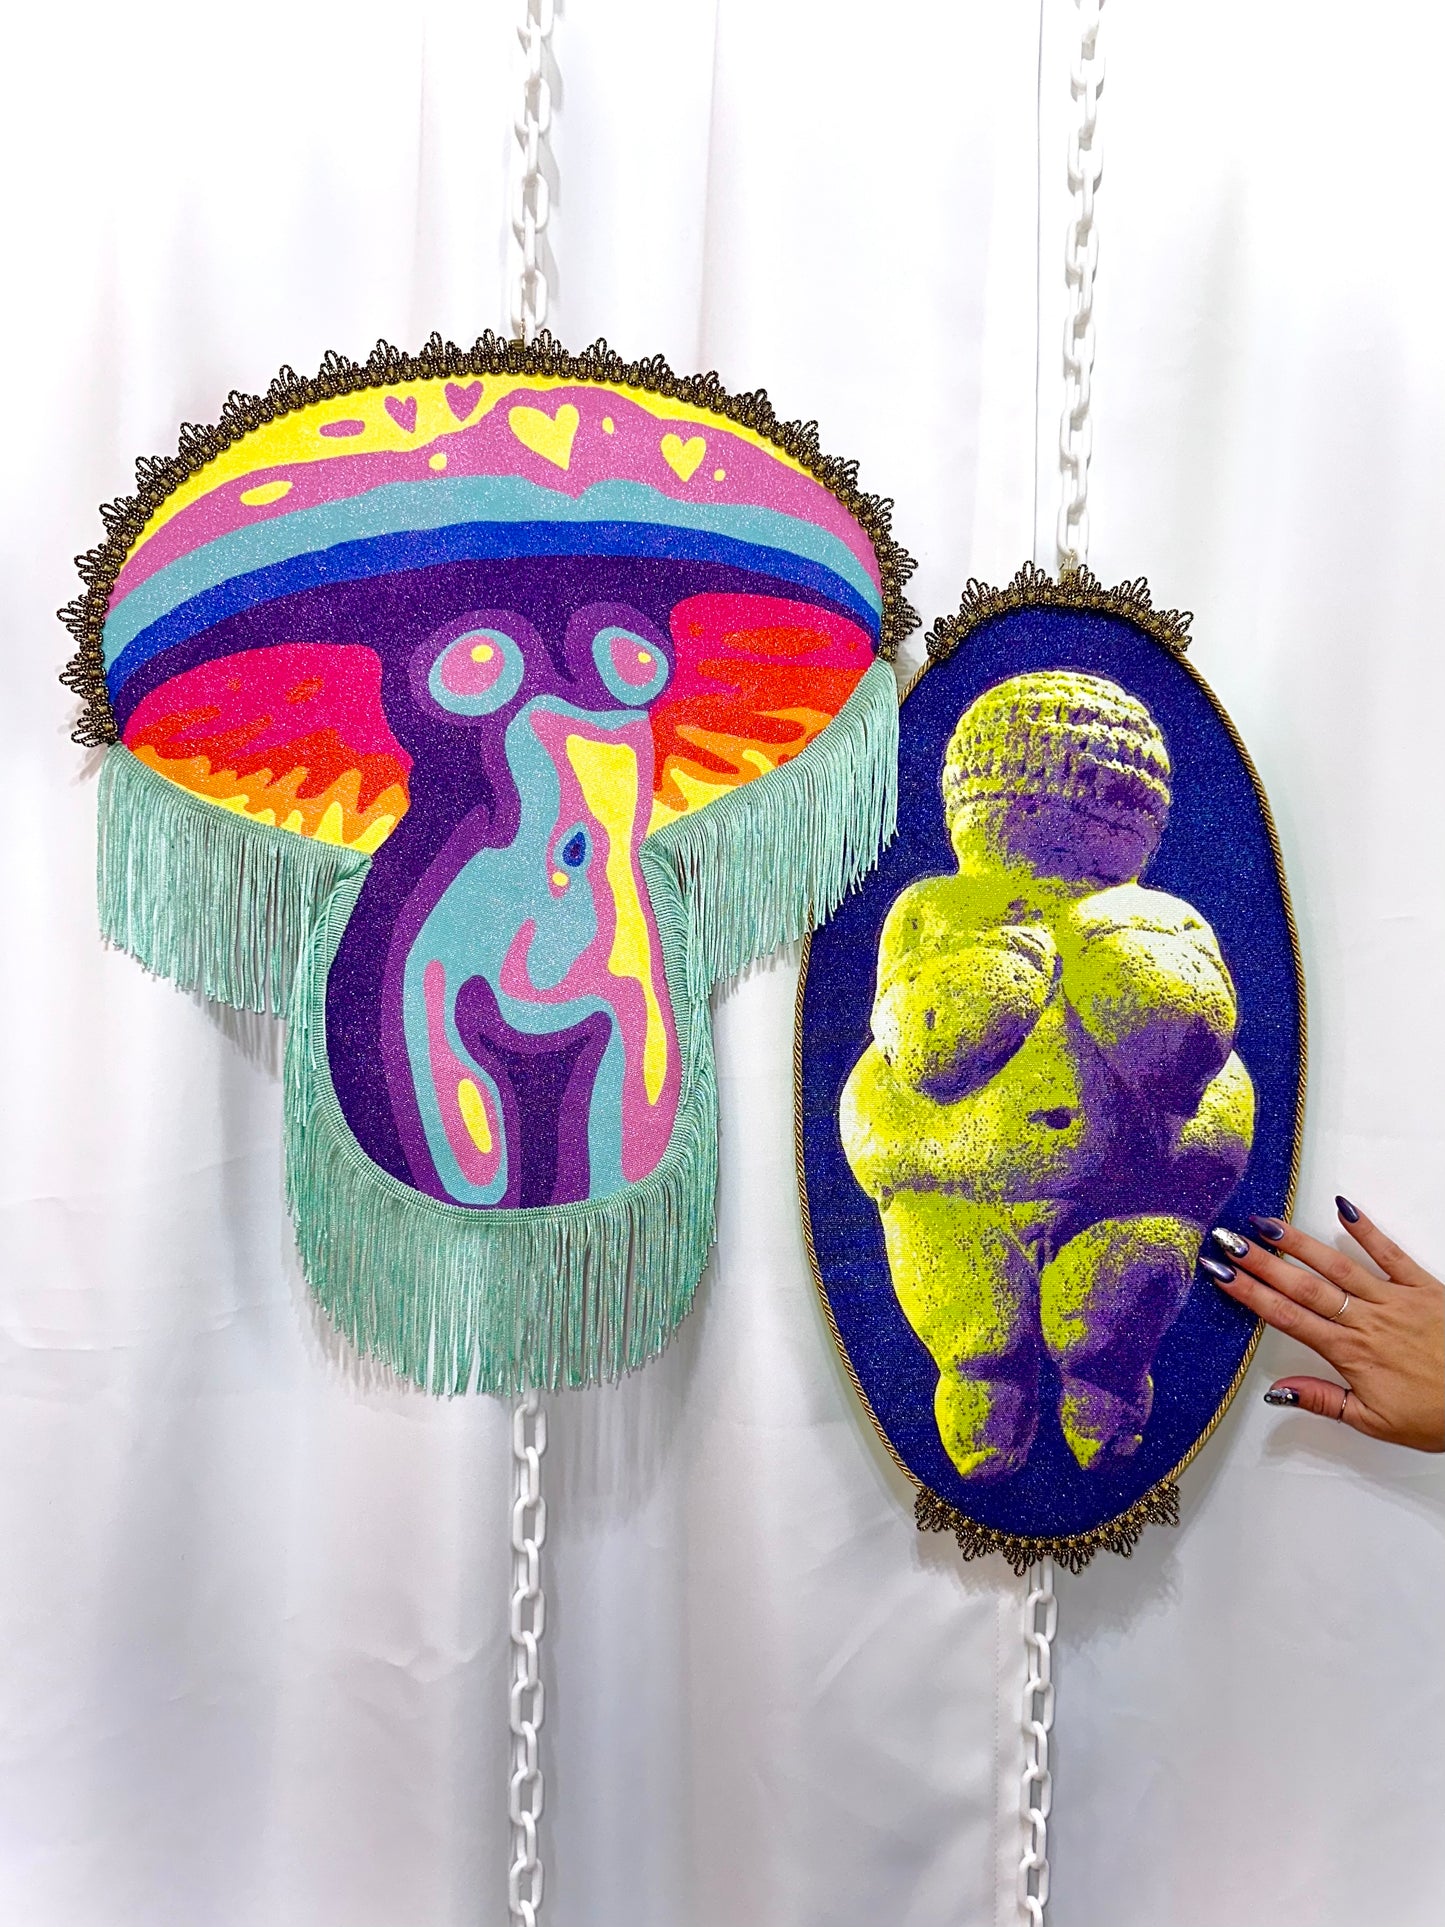 HandMade By The Artist: Glitter Venus of Willendorf, by Chrissy Crater